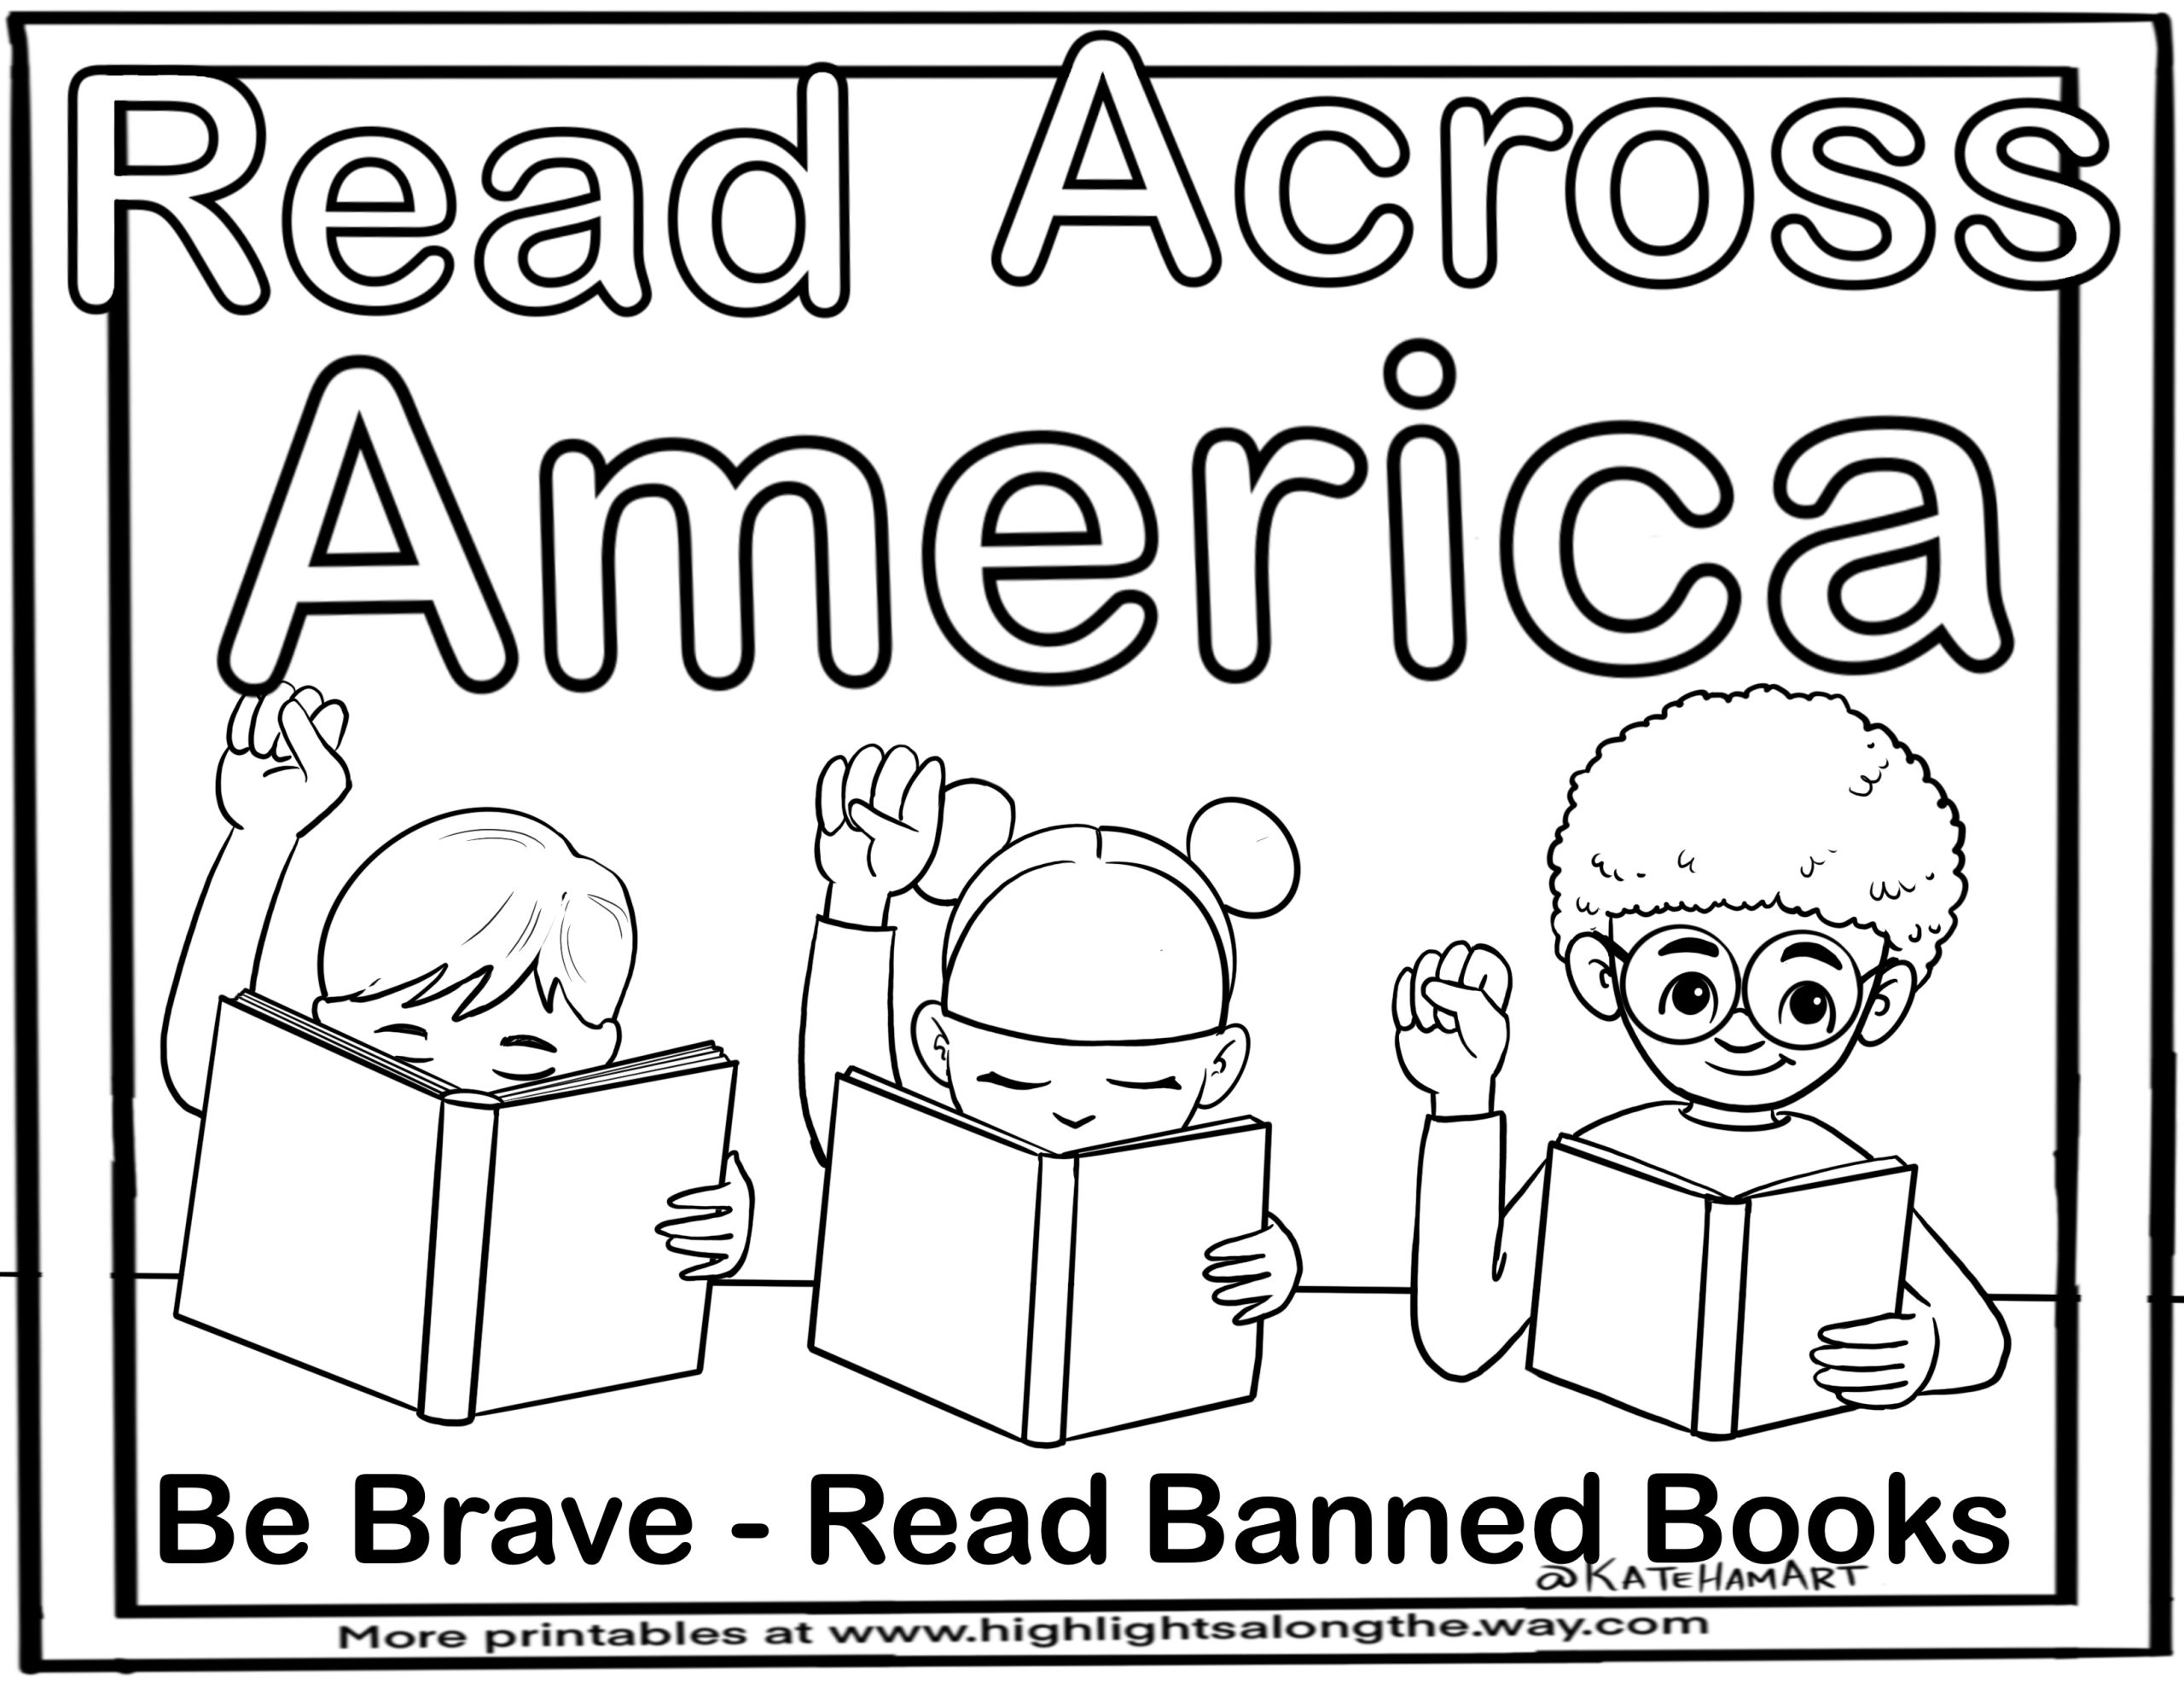 read-across-america-coloring-pages